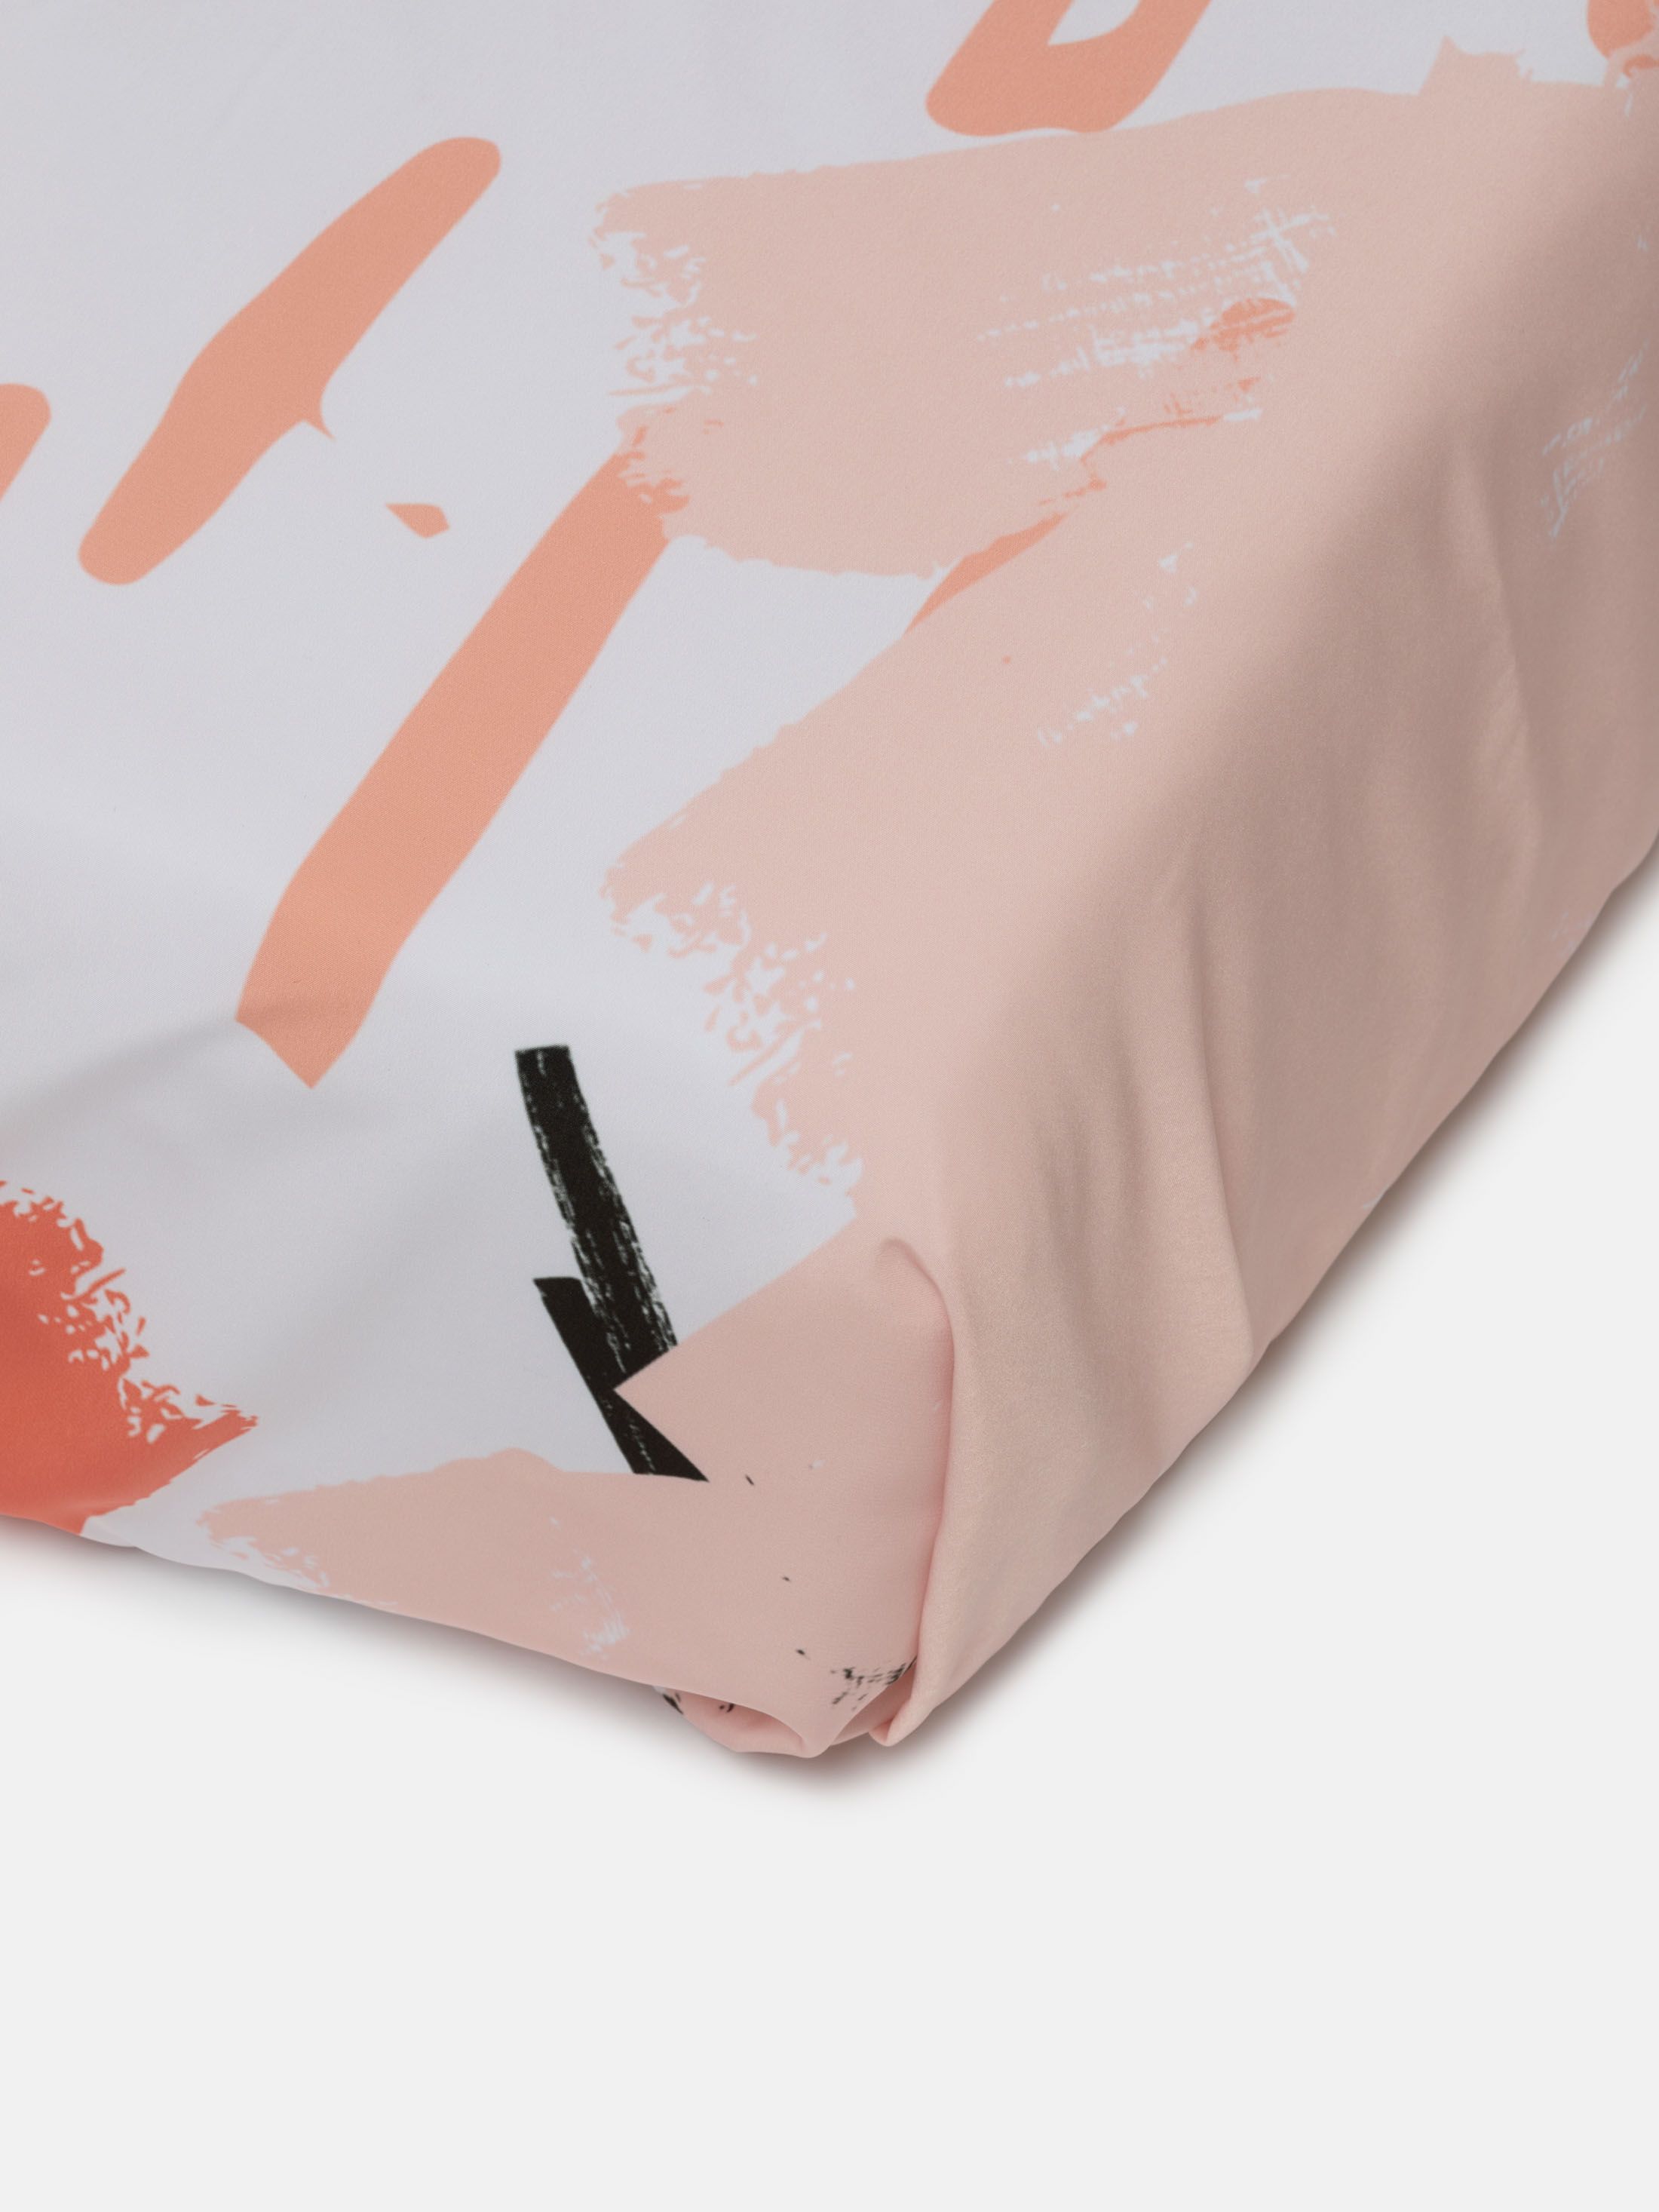 custom designed and printed bed sheets